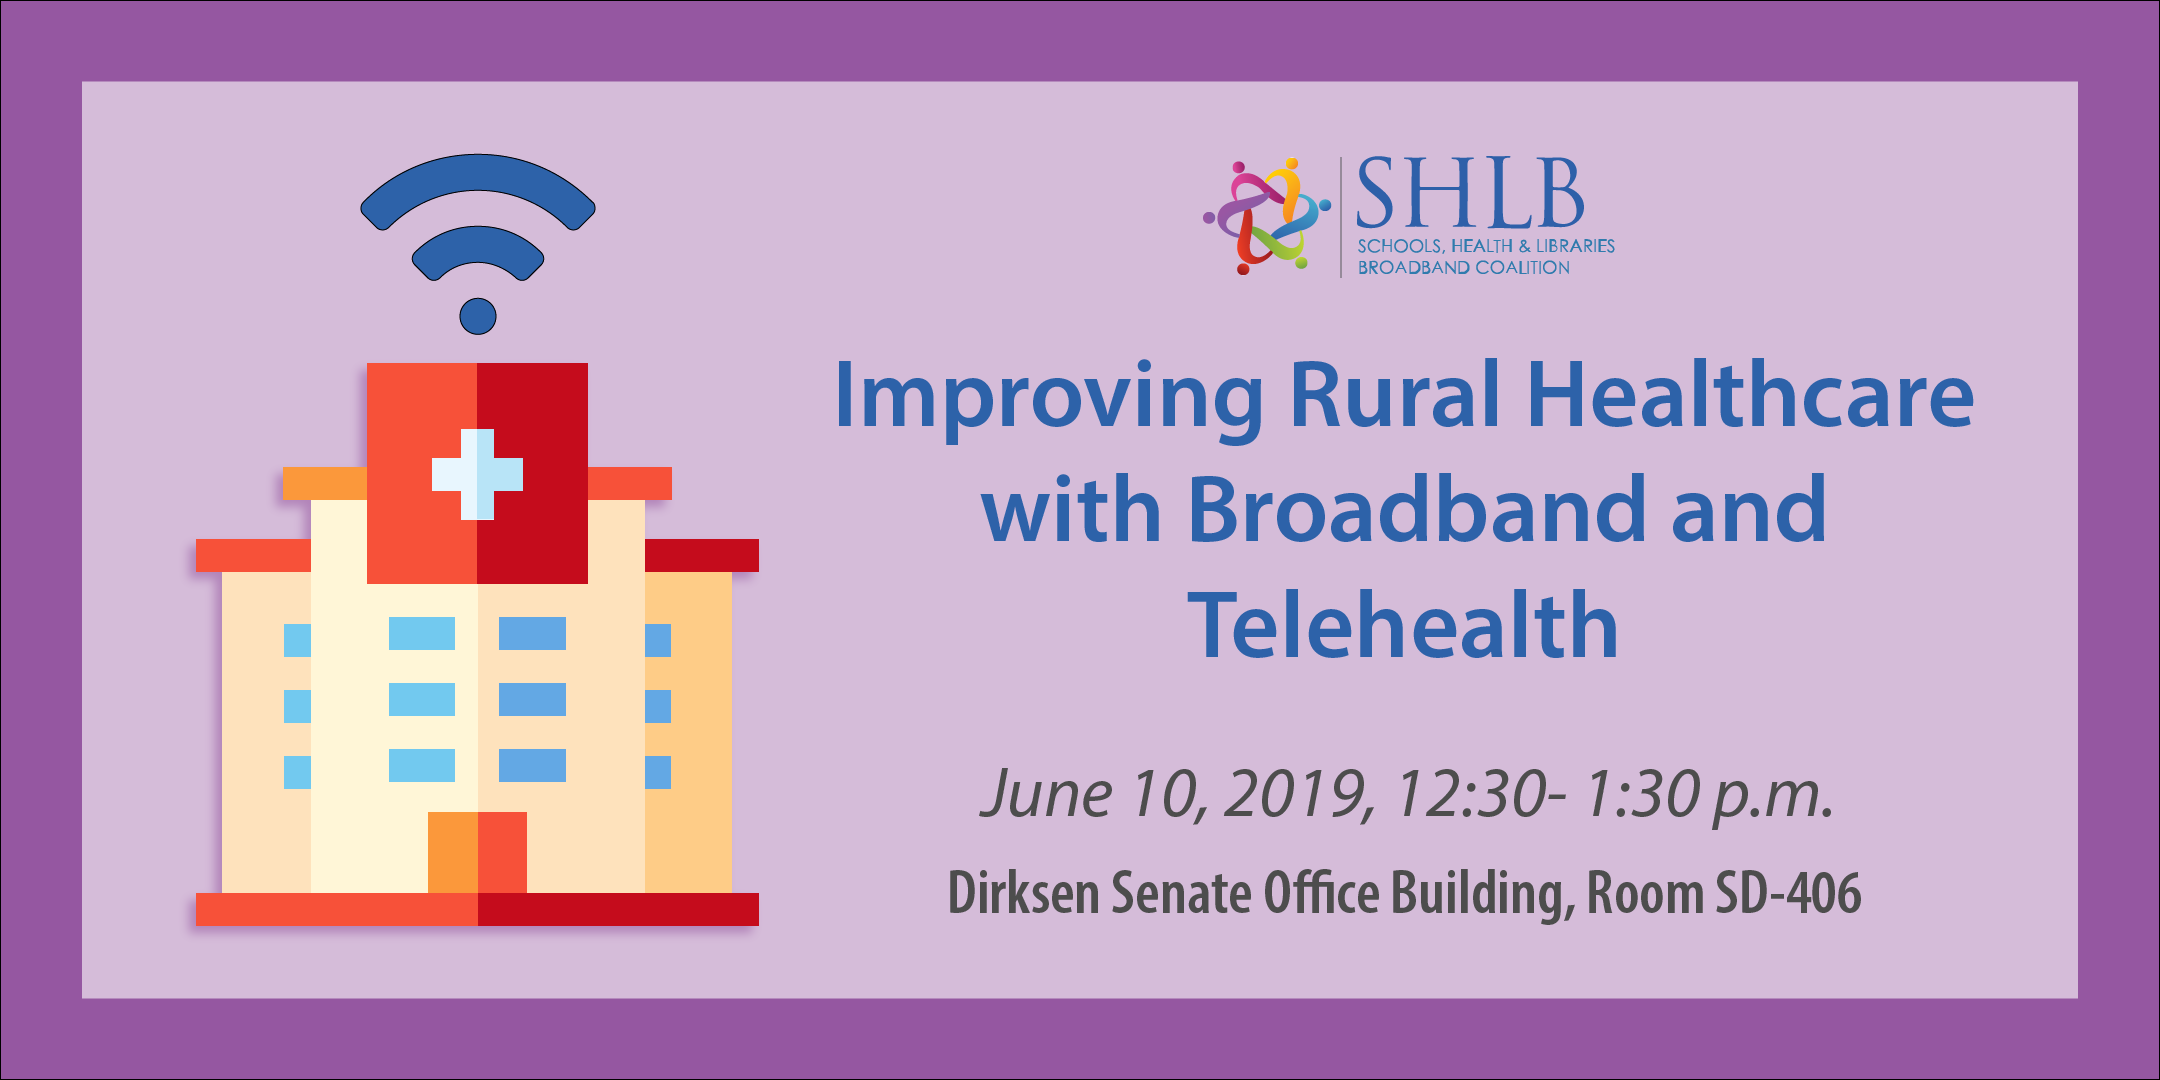 Improving Rural Healthcare with Broadband and Telehealth